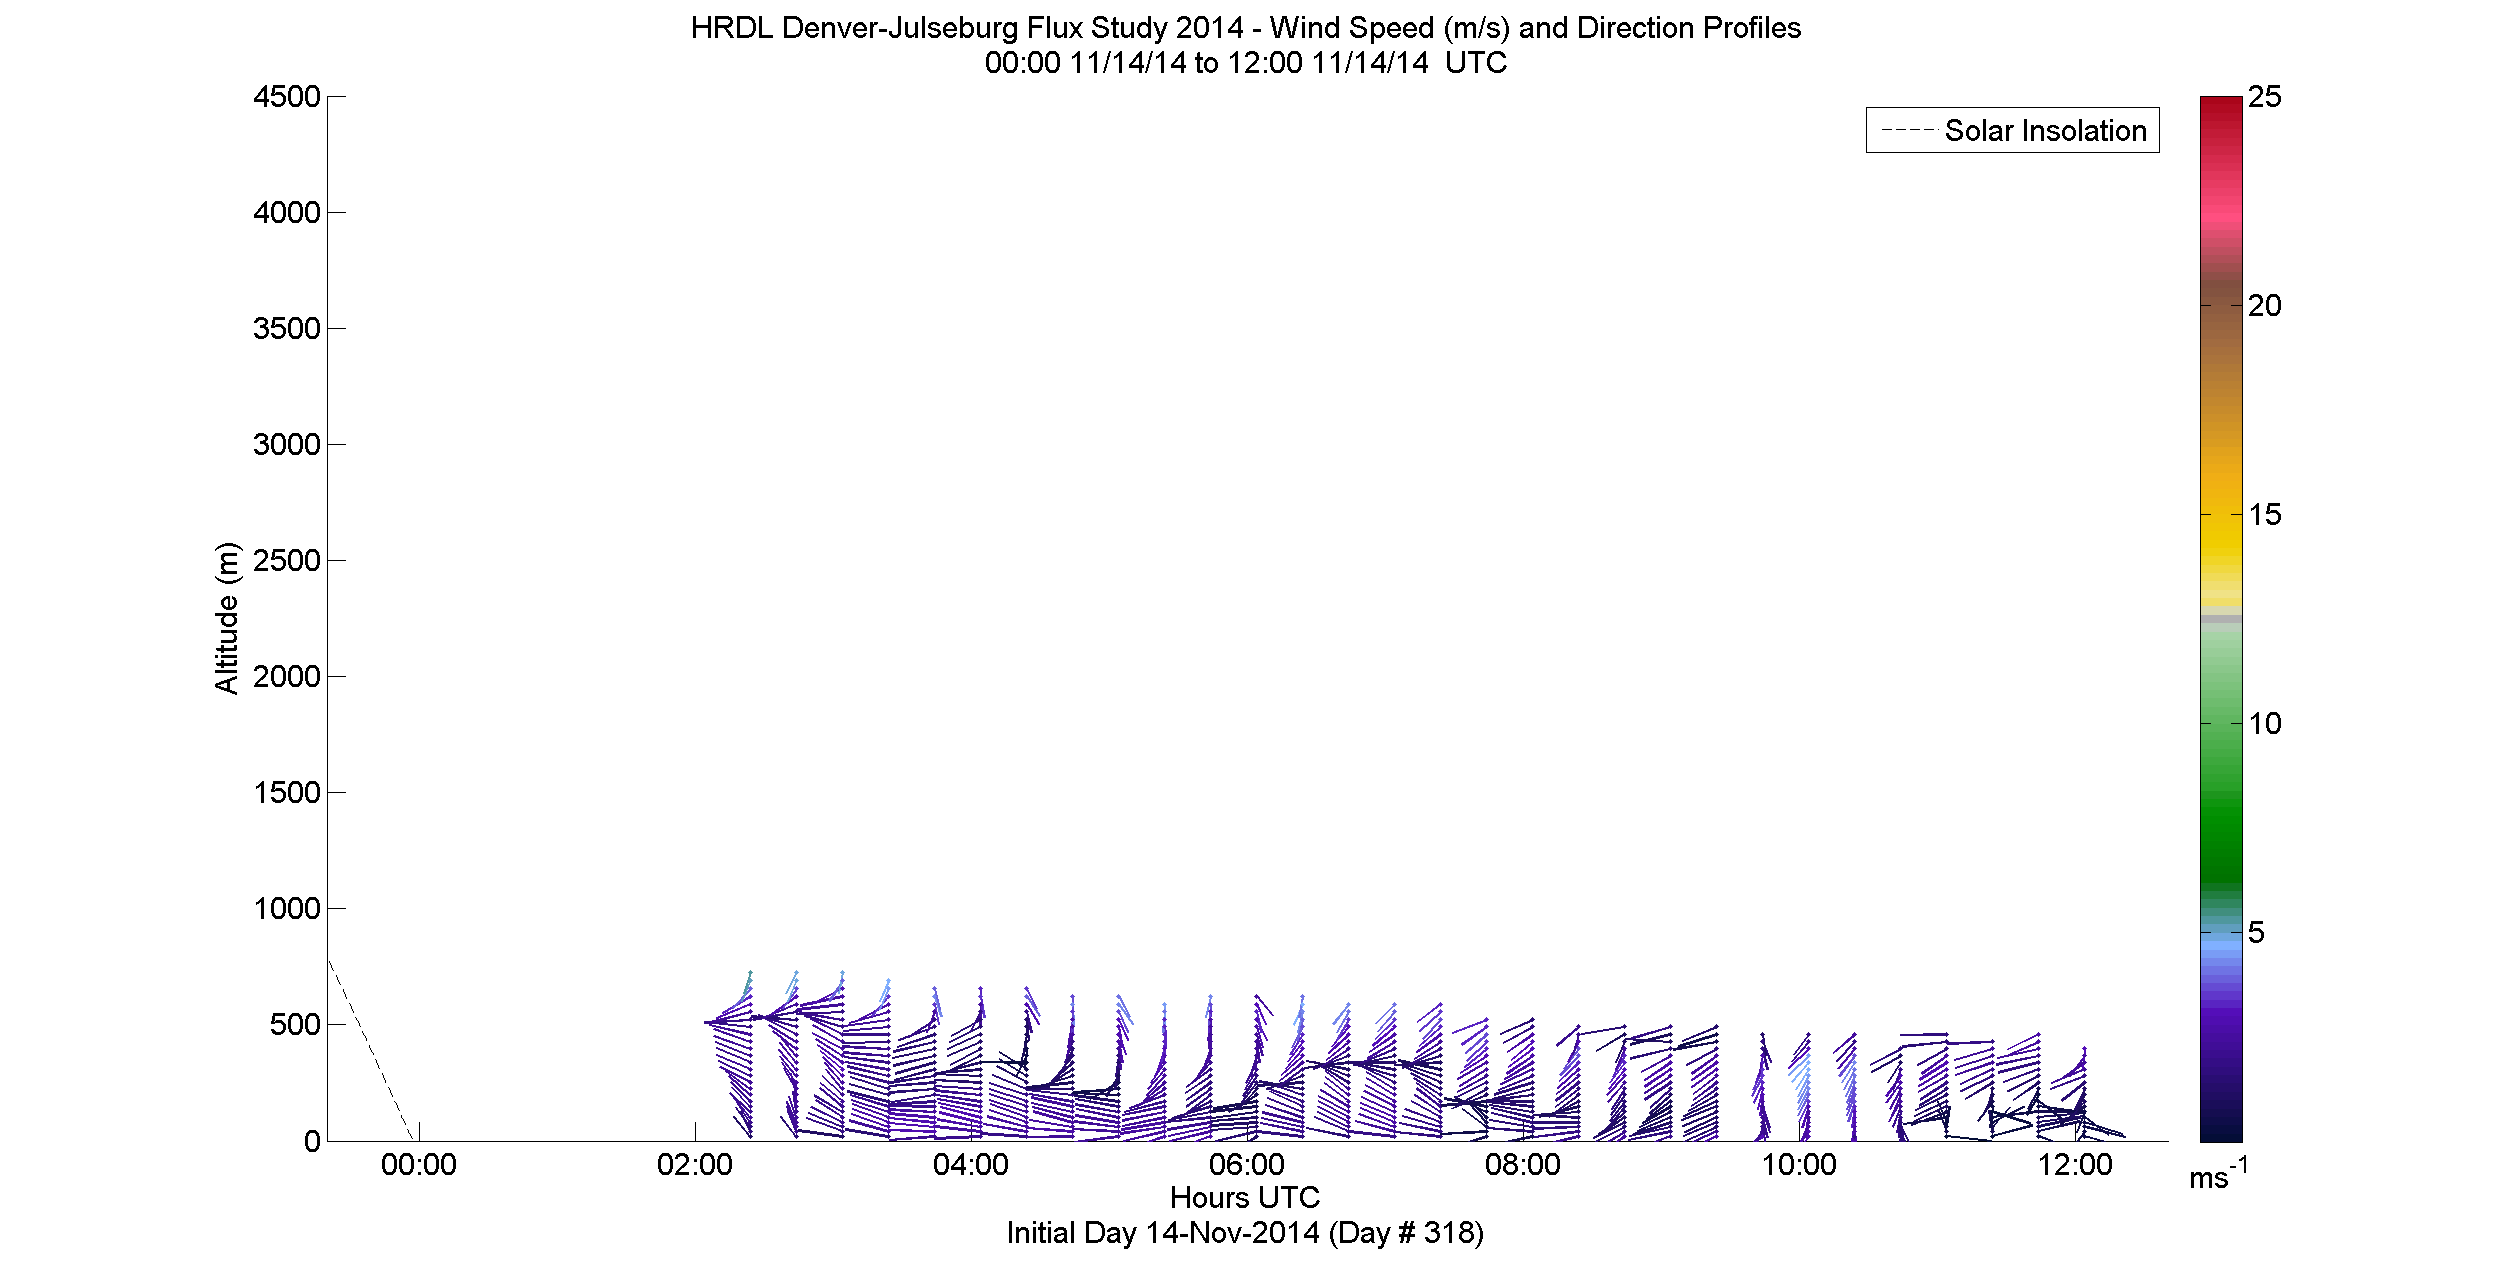 HRDL speed and direction profile - November 14 am